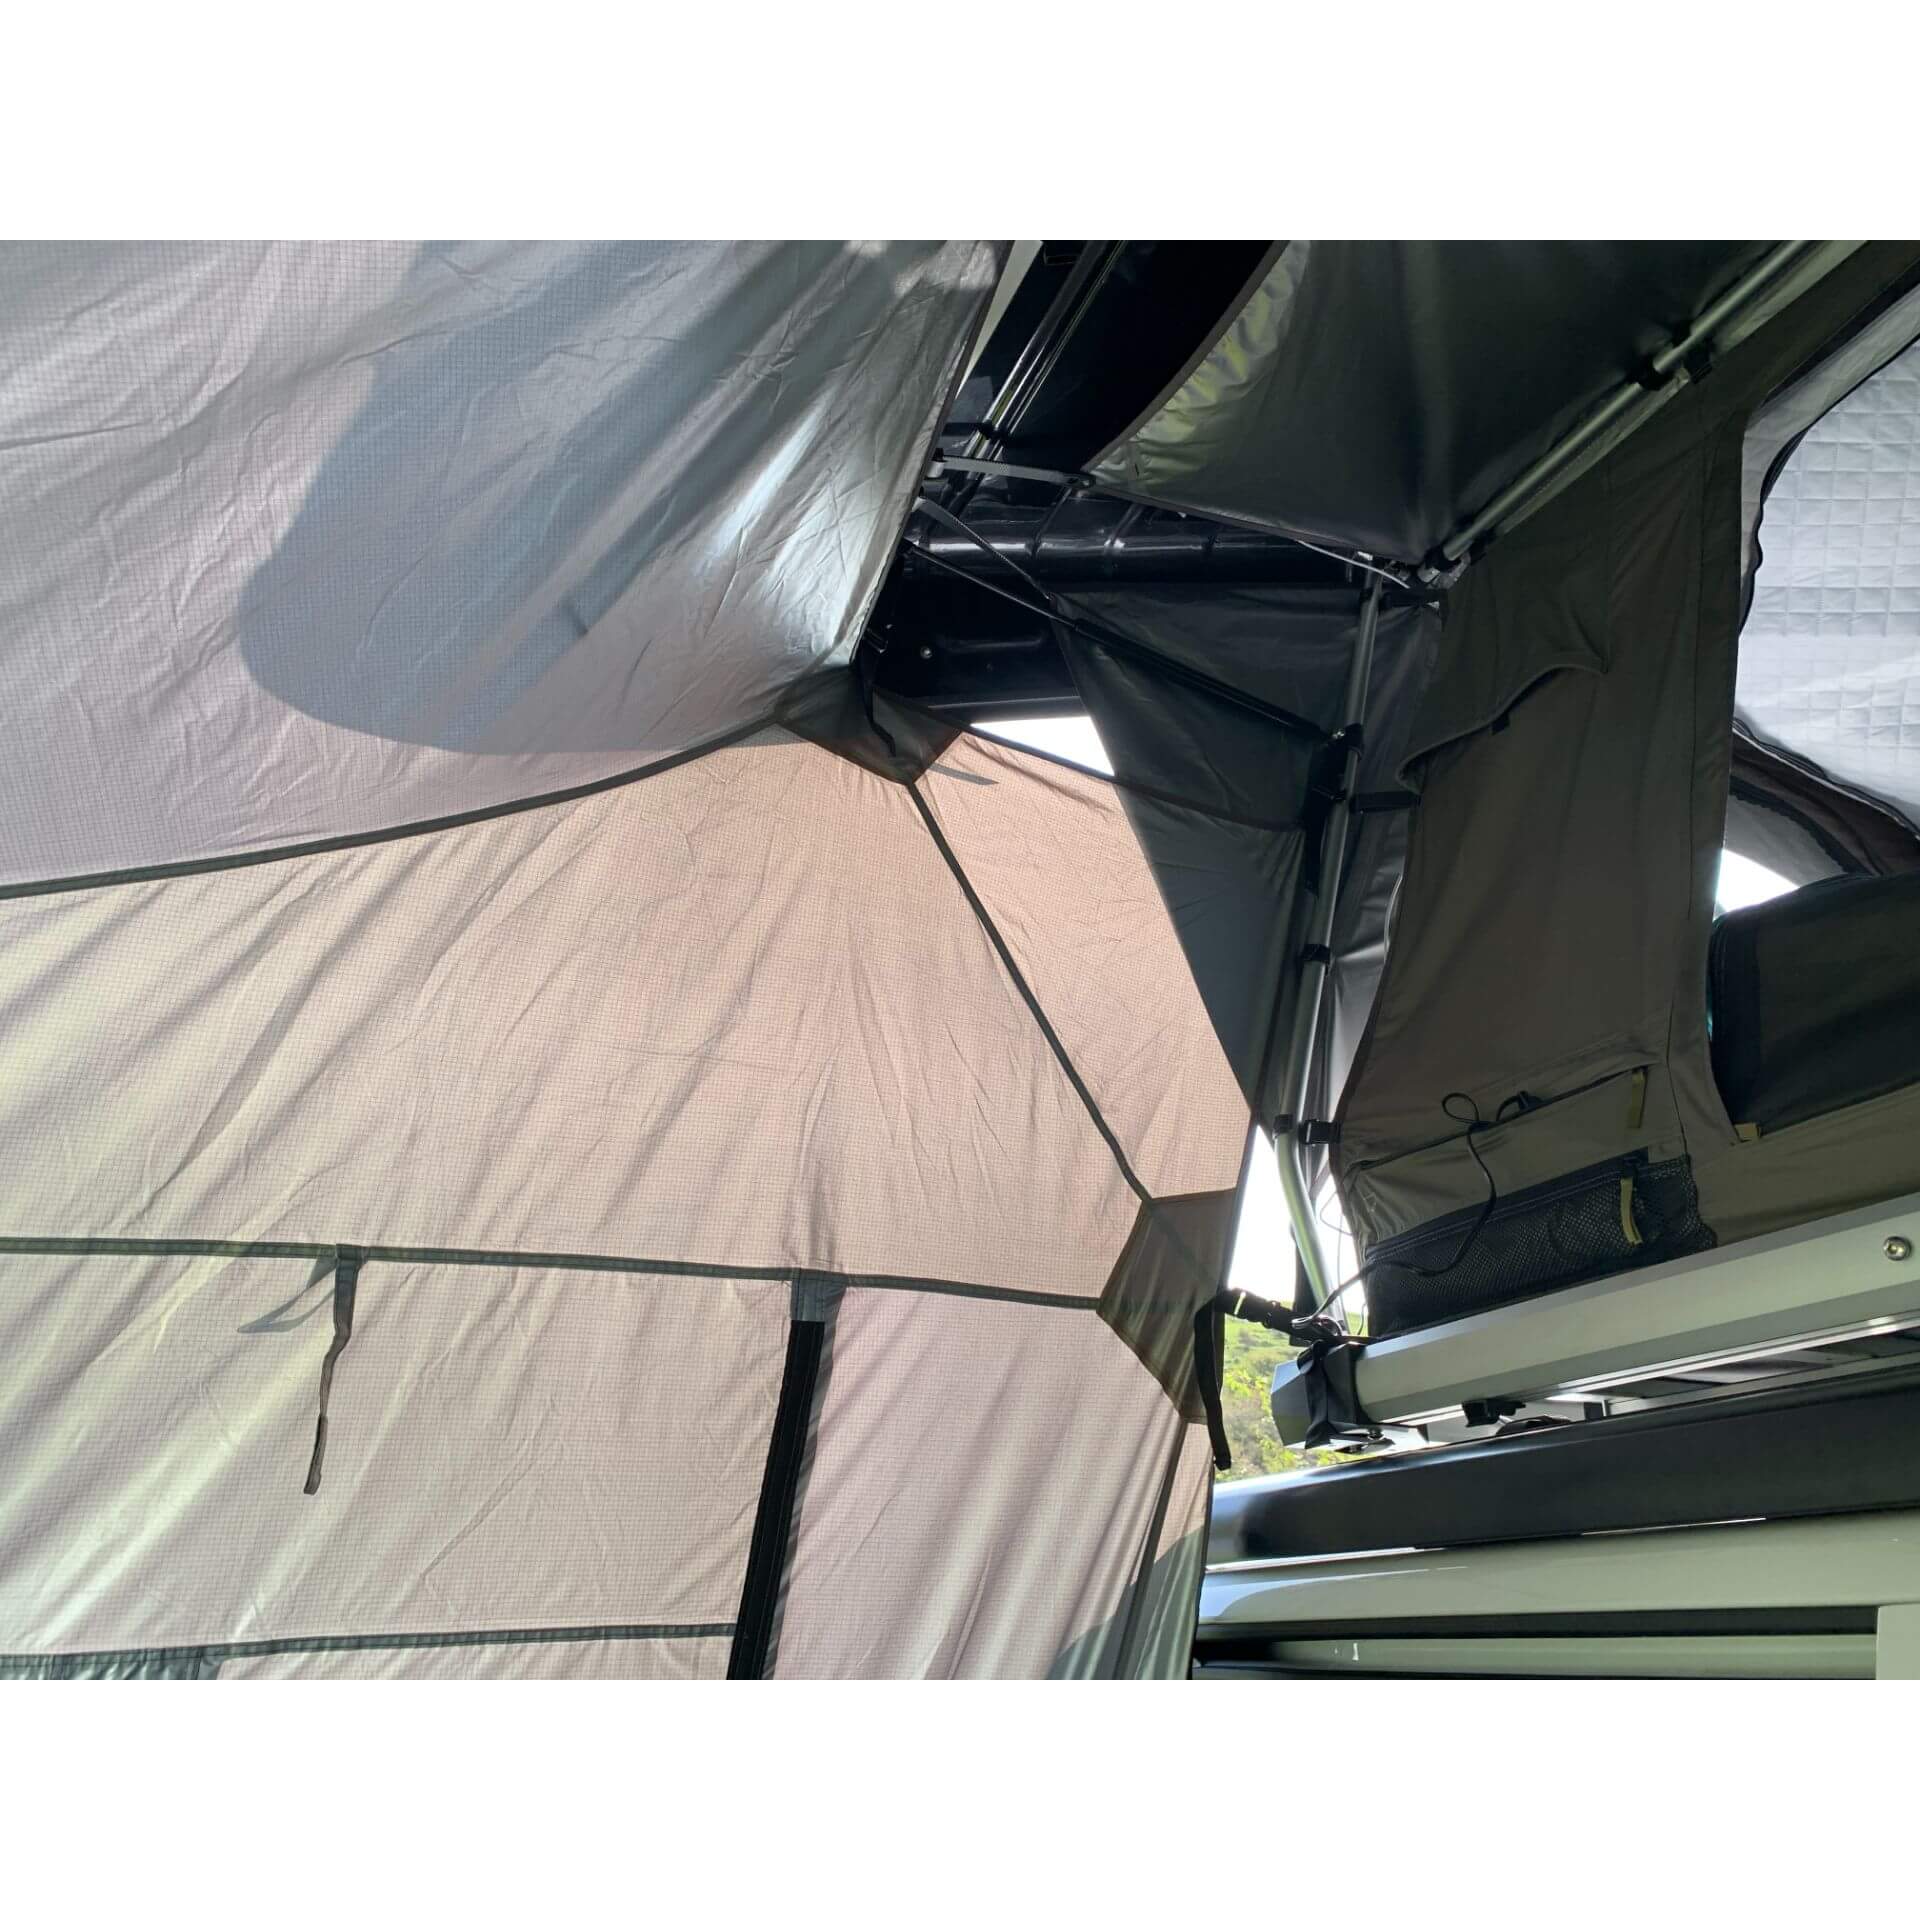 Granite Grey Annex Room Addon for Direct4x4 Pathseeker Roof Top Tent -  - sold by Direct4x4